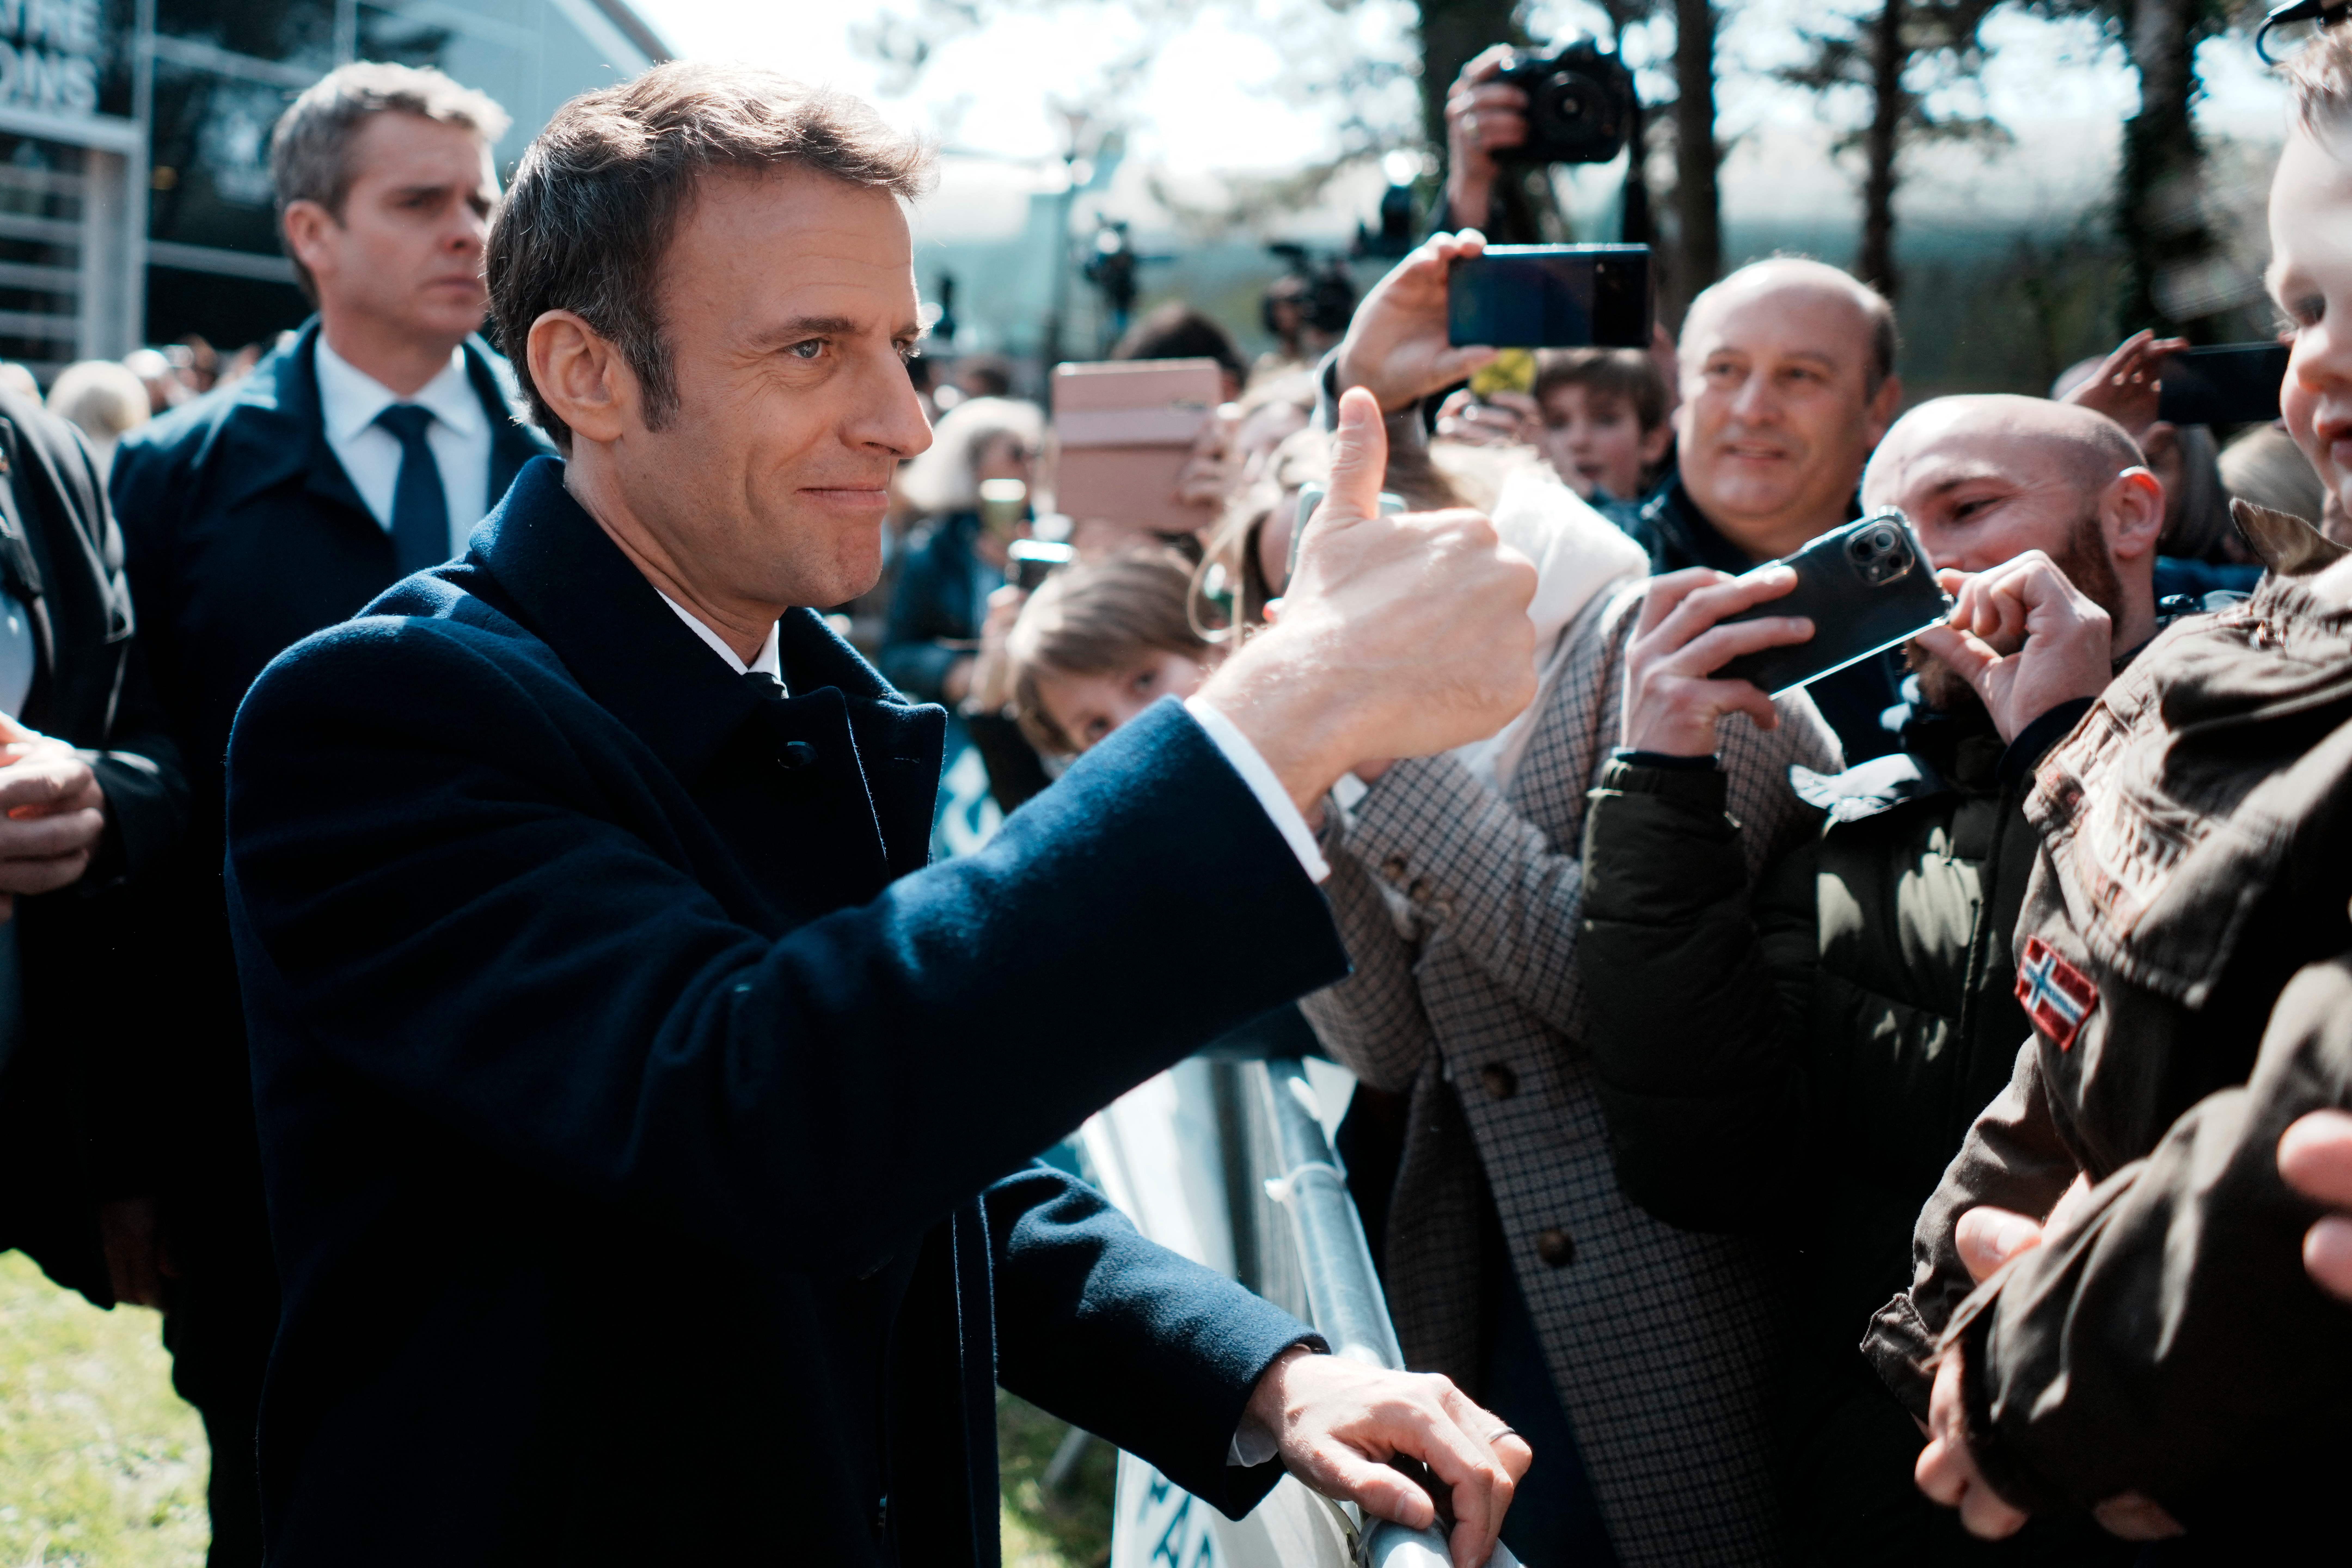 Macron gives the thumbs up after voting in the first round of France’s presidential election in Le Touquet